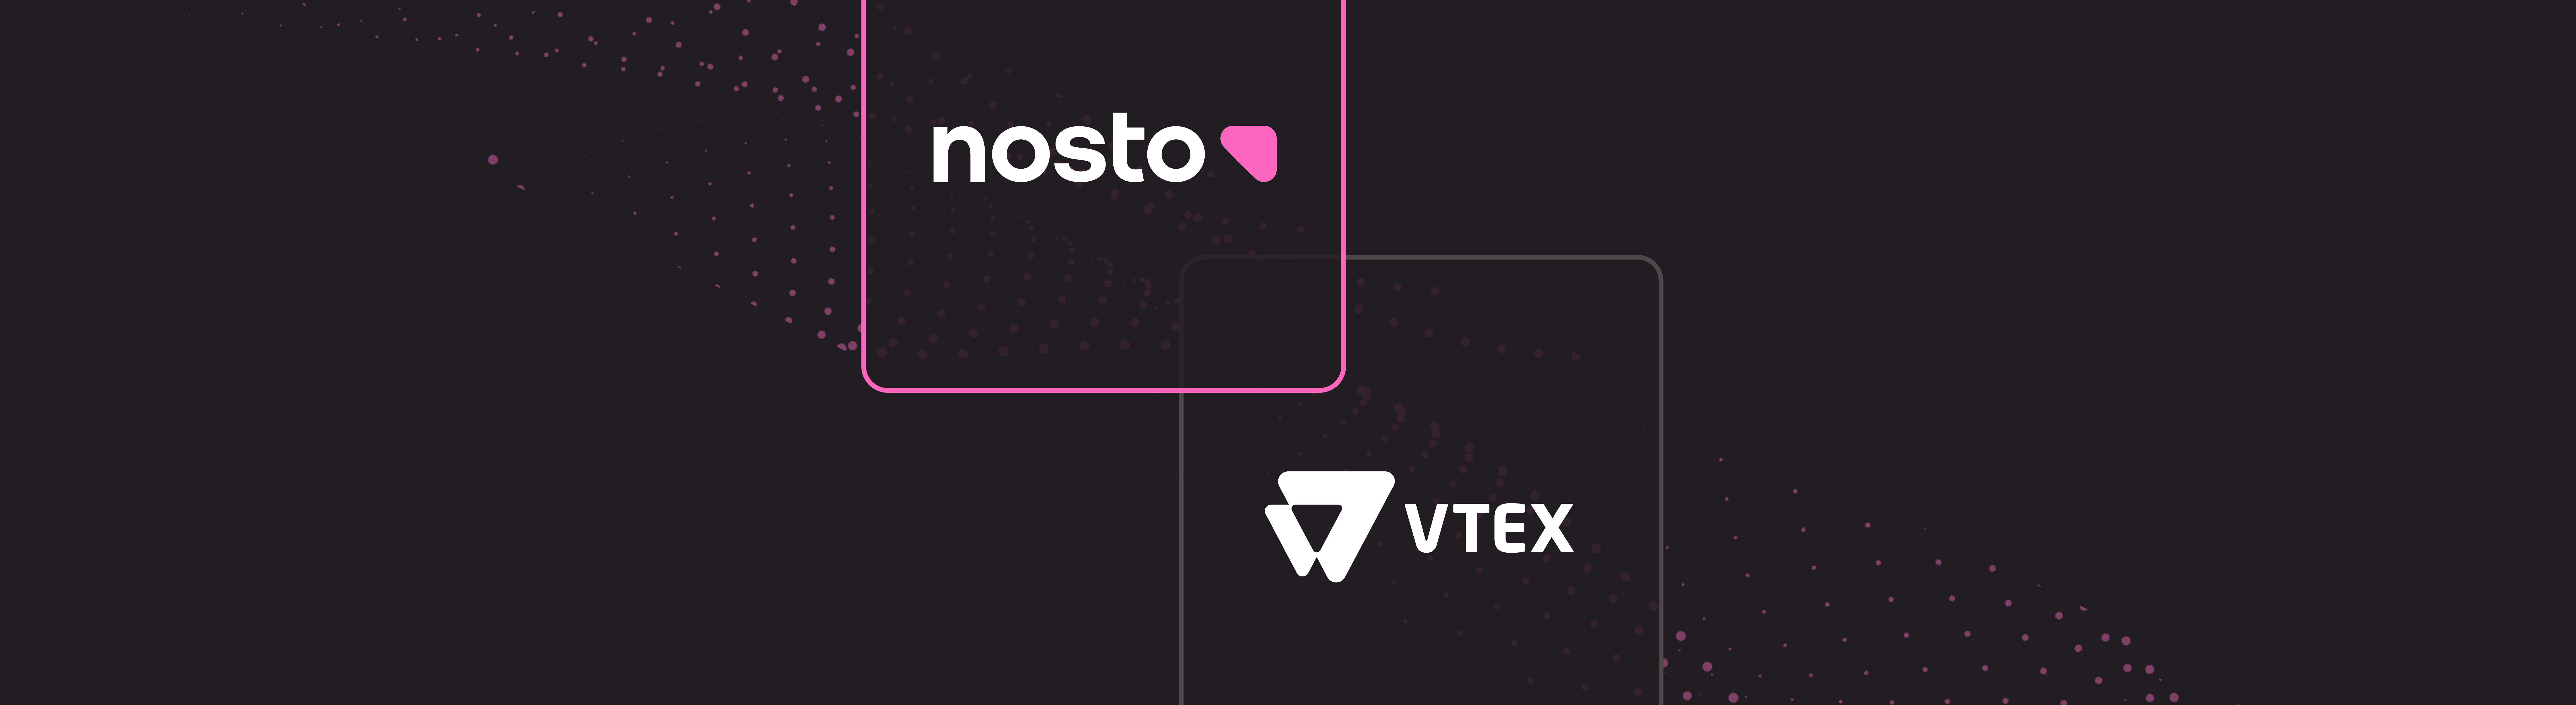 Nosto and VTEX launch Commerce Experience app, powering intelligent, personalized product discovery for online brands